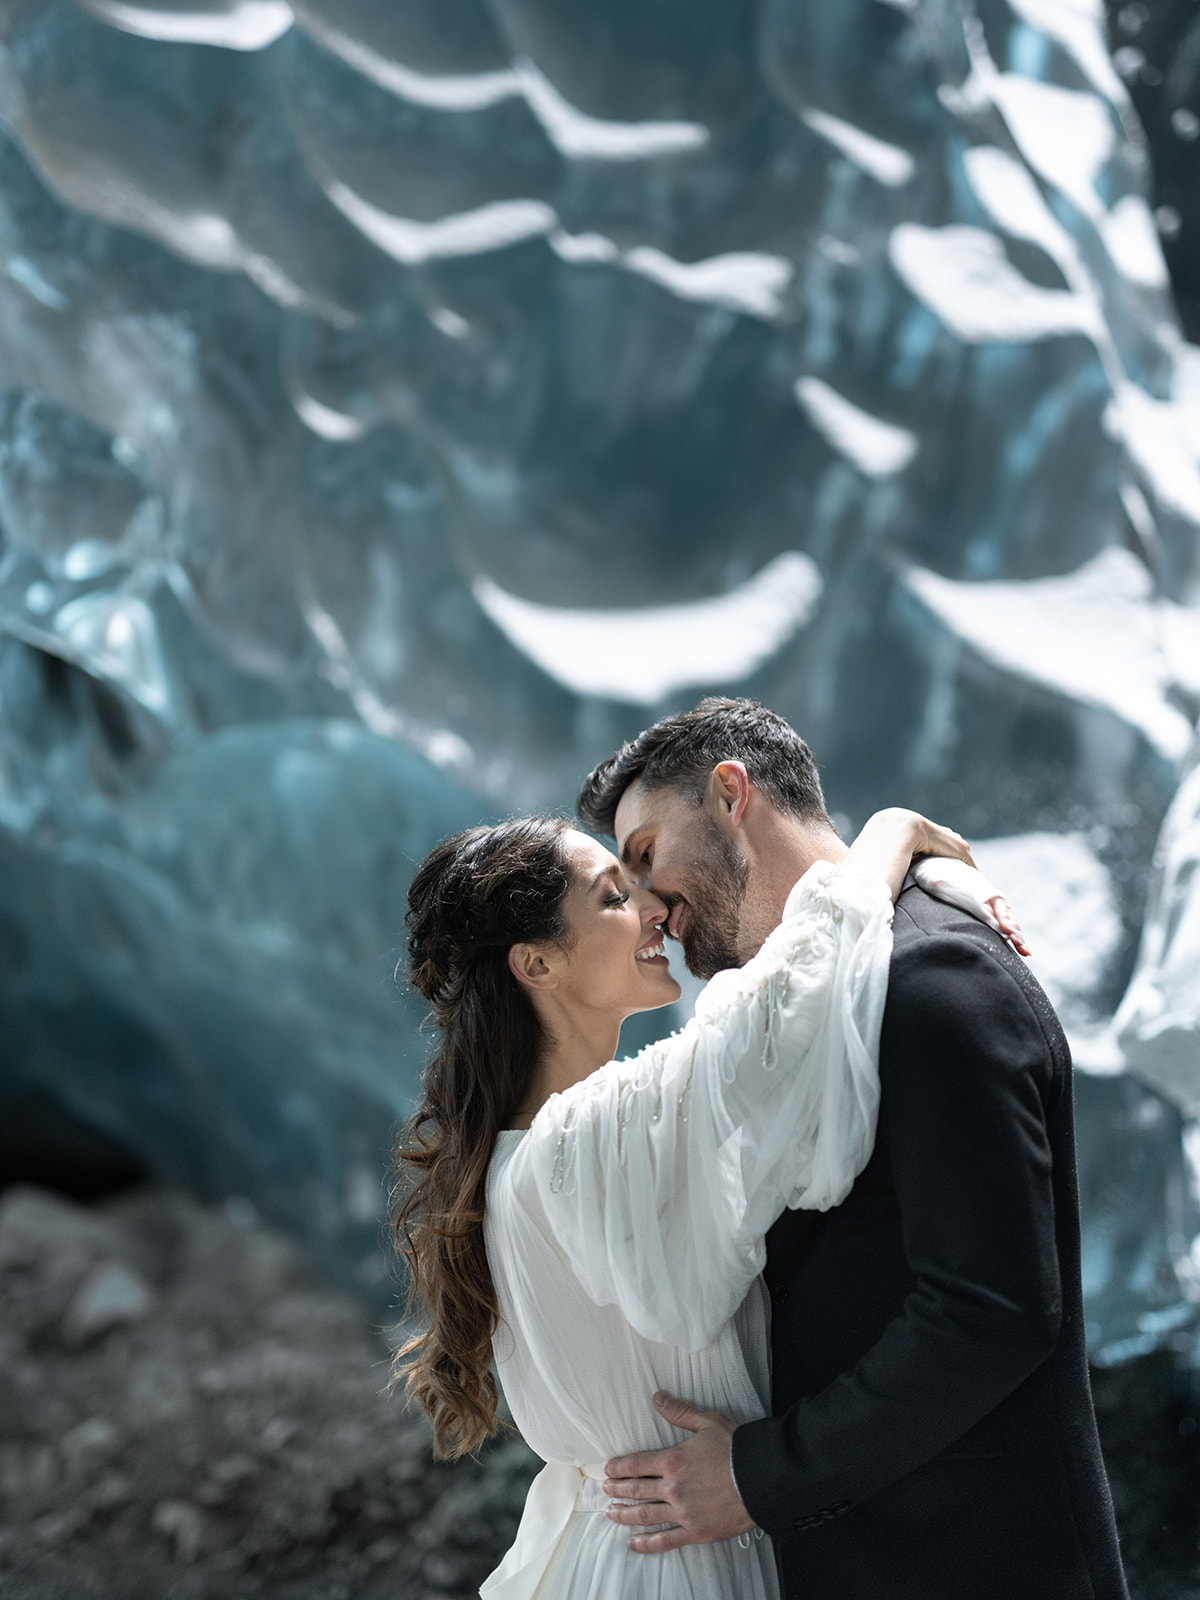 bride and groom sharing an intimate moment in an ice cave during their elopement in Iceland